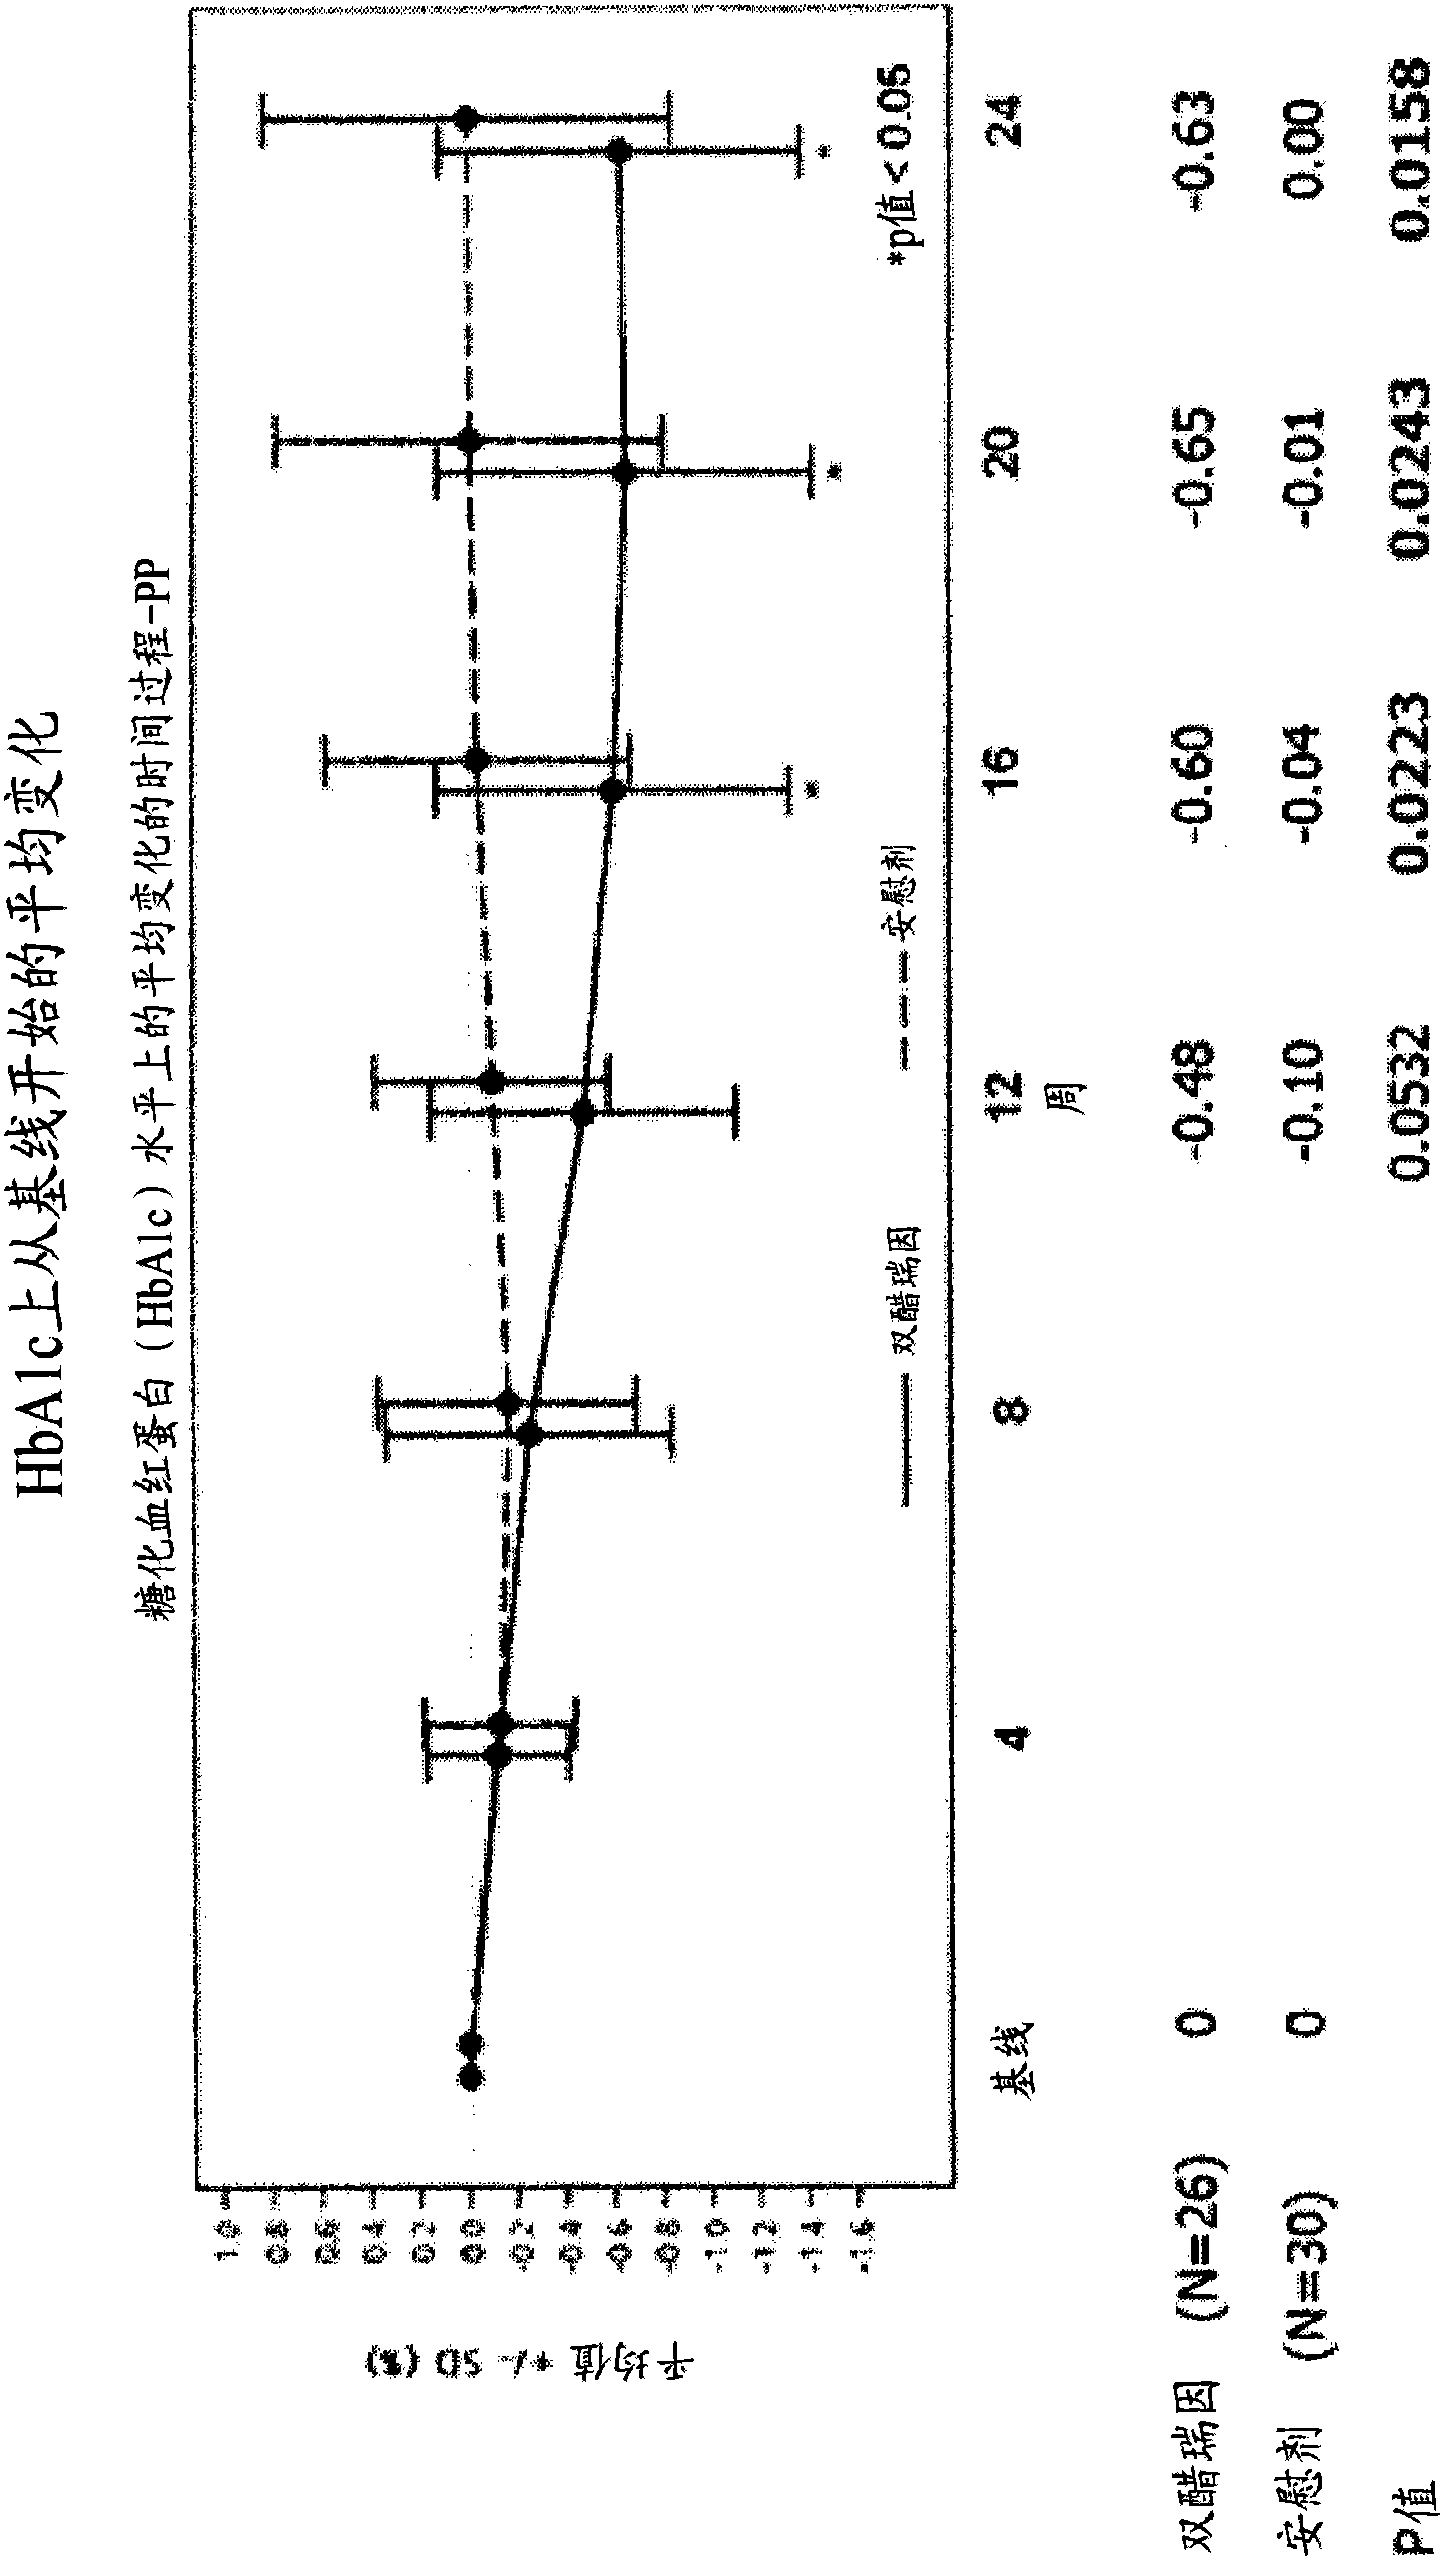 Methods of using diacerein as an adjunctive therapy for diabetes